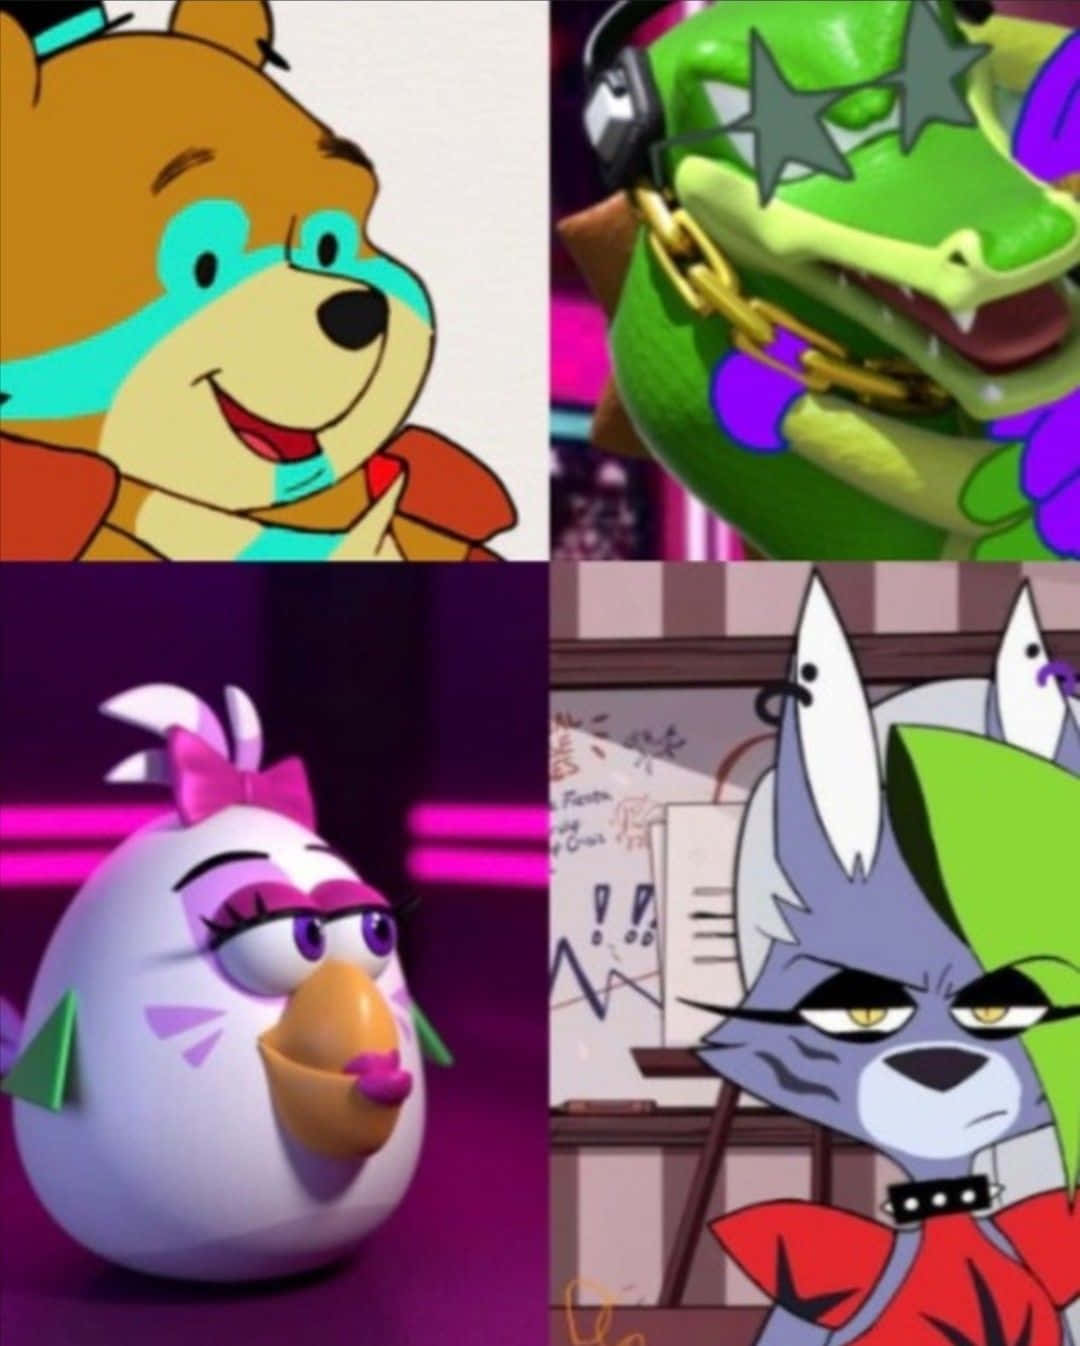 Meet the cast of Five Nights at Freddy's